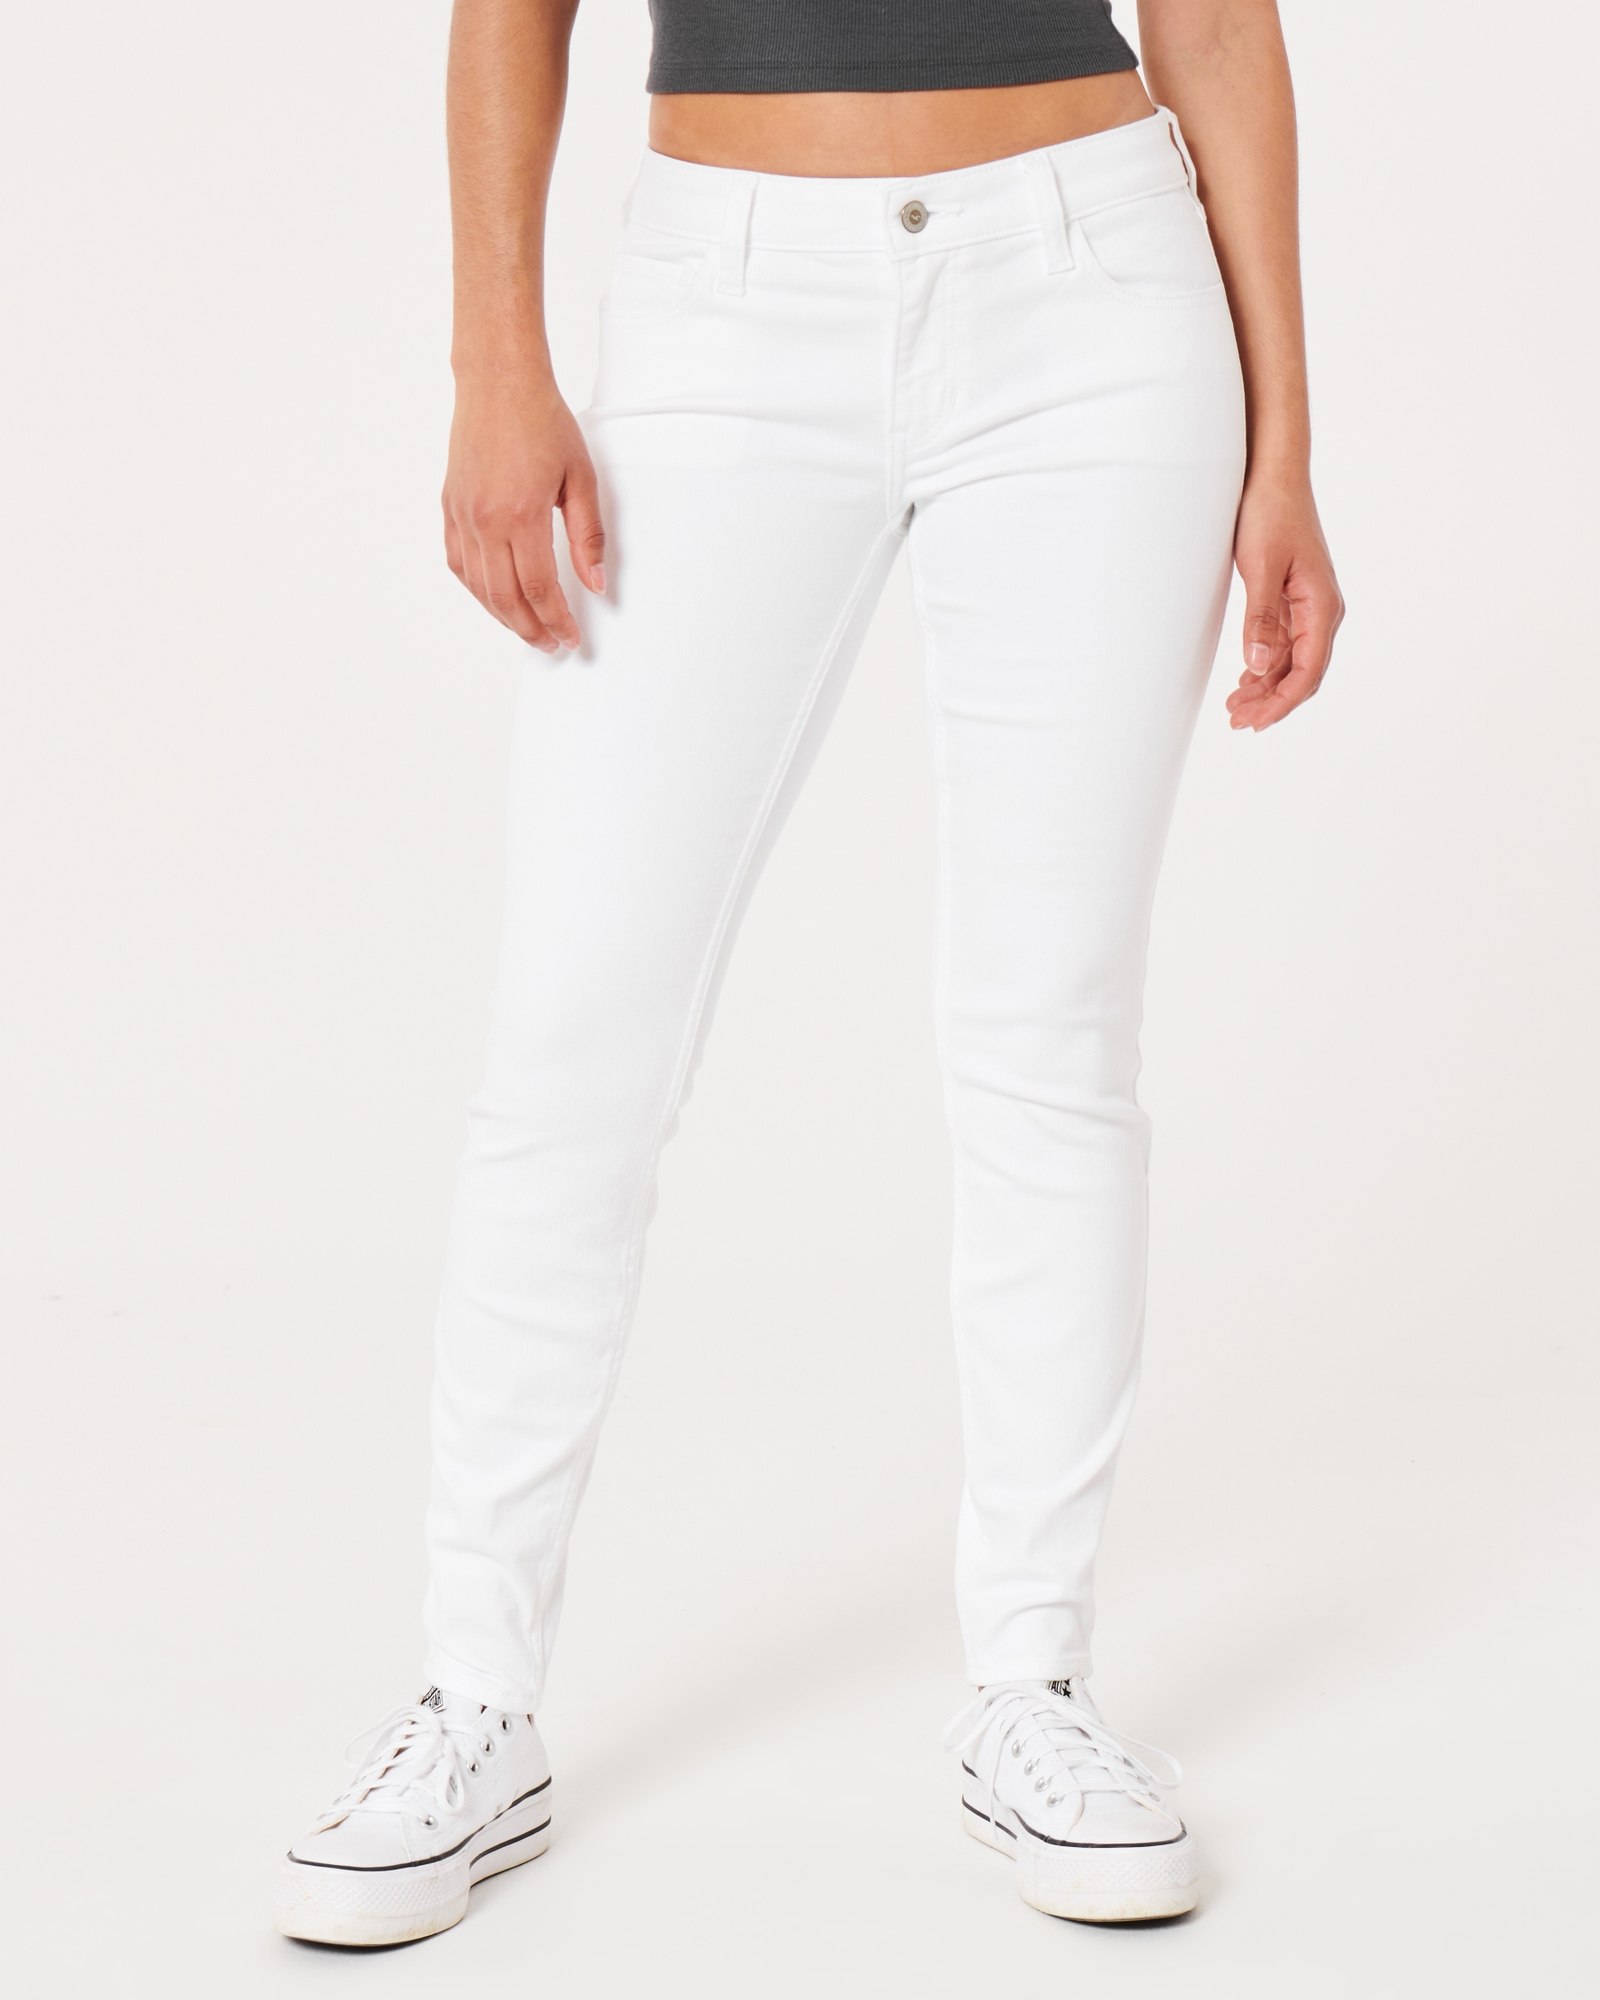 Hollister low rise skinny jeans, Very cute Navy blue